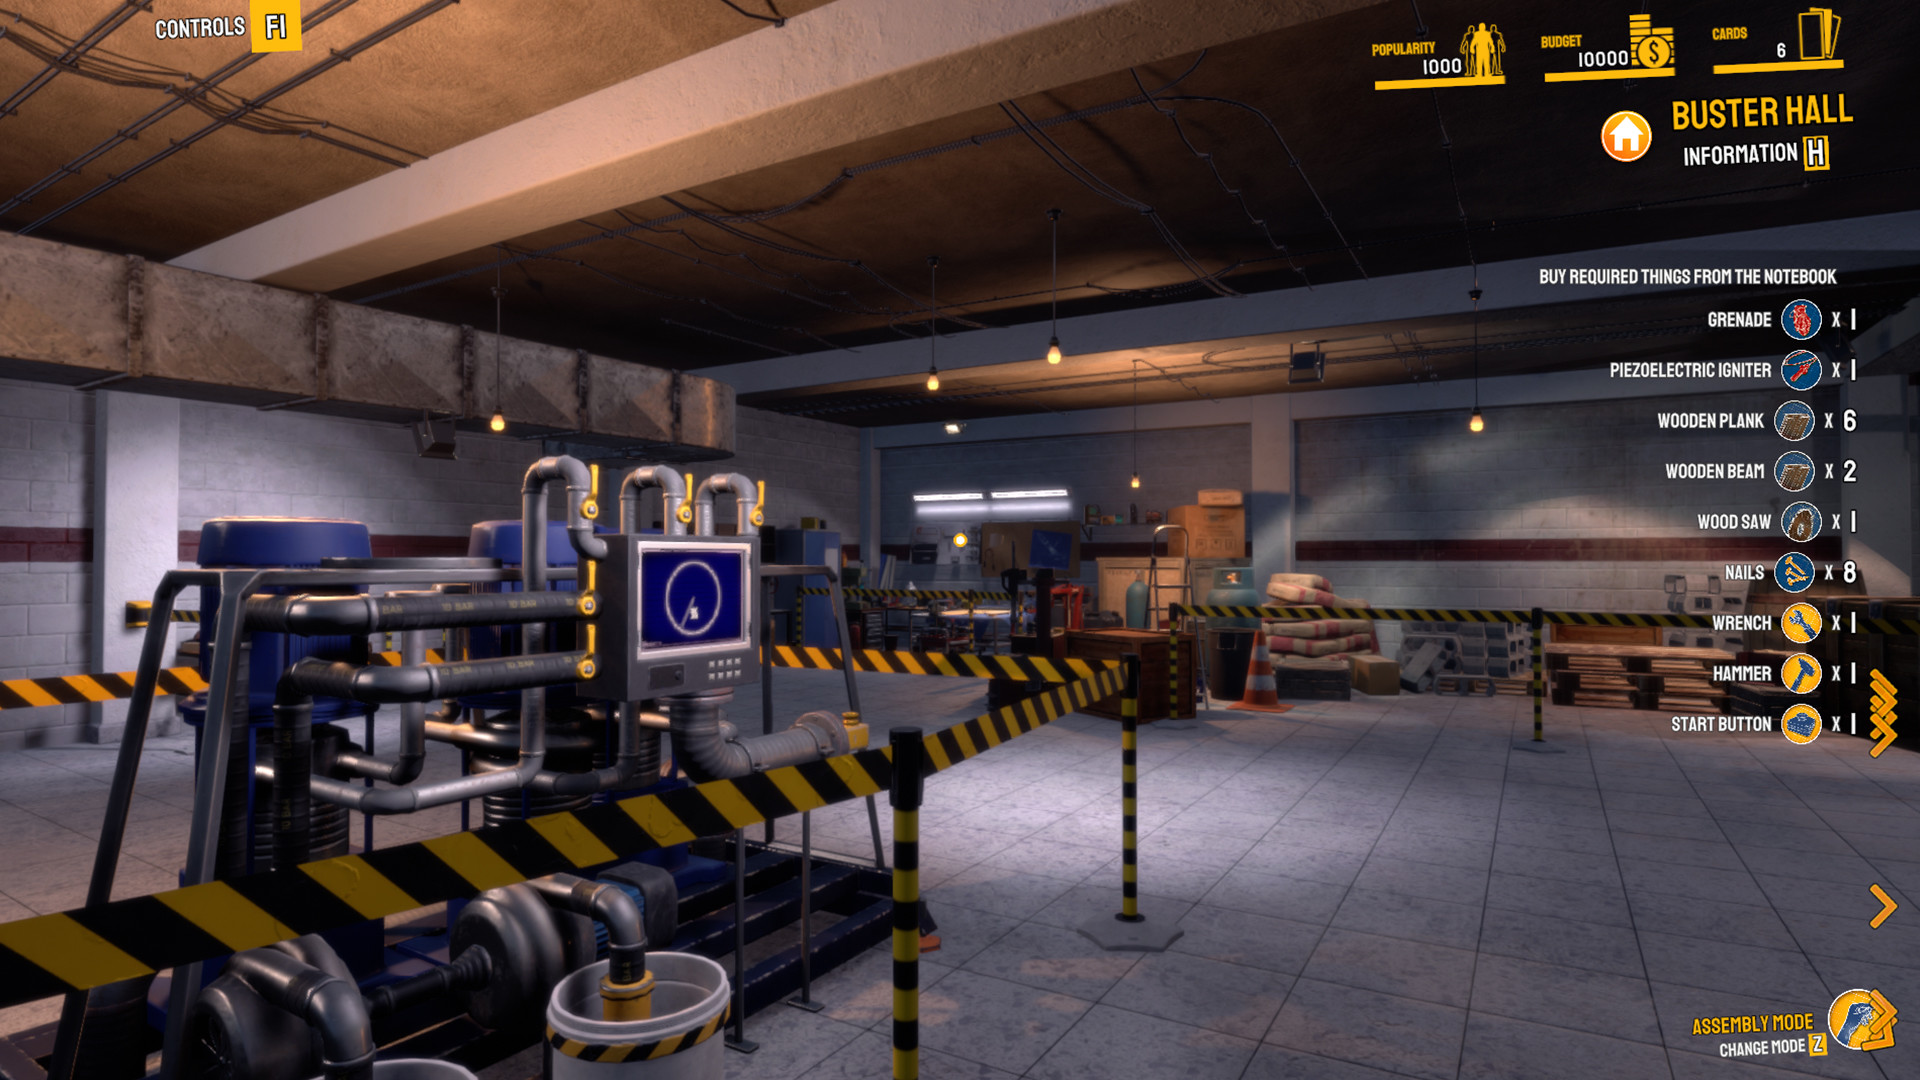 MythBusters: The Game - Crazy Experiments Simulator Free Download